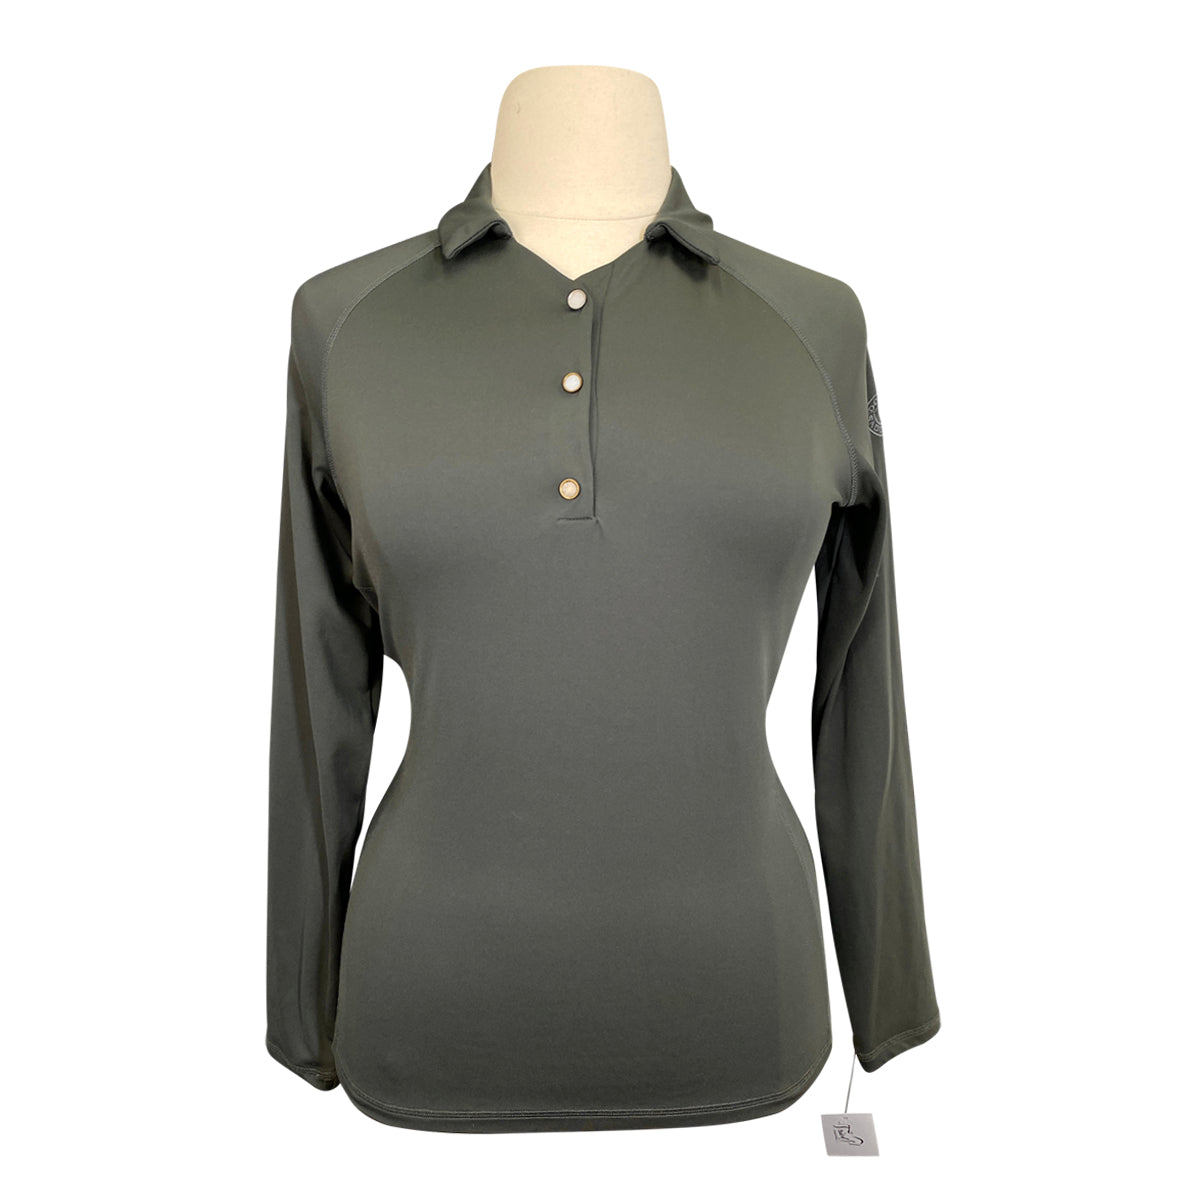 Dover 'Galen' Long Sleeve Shirt in Forest Green